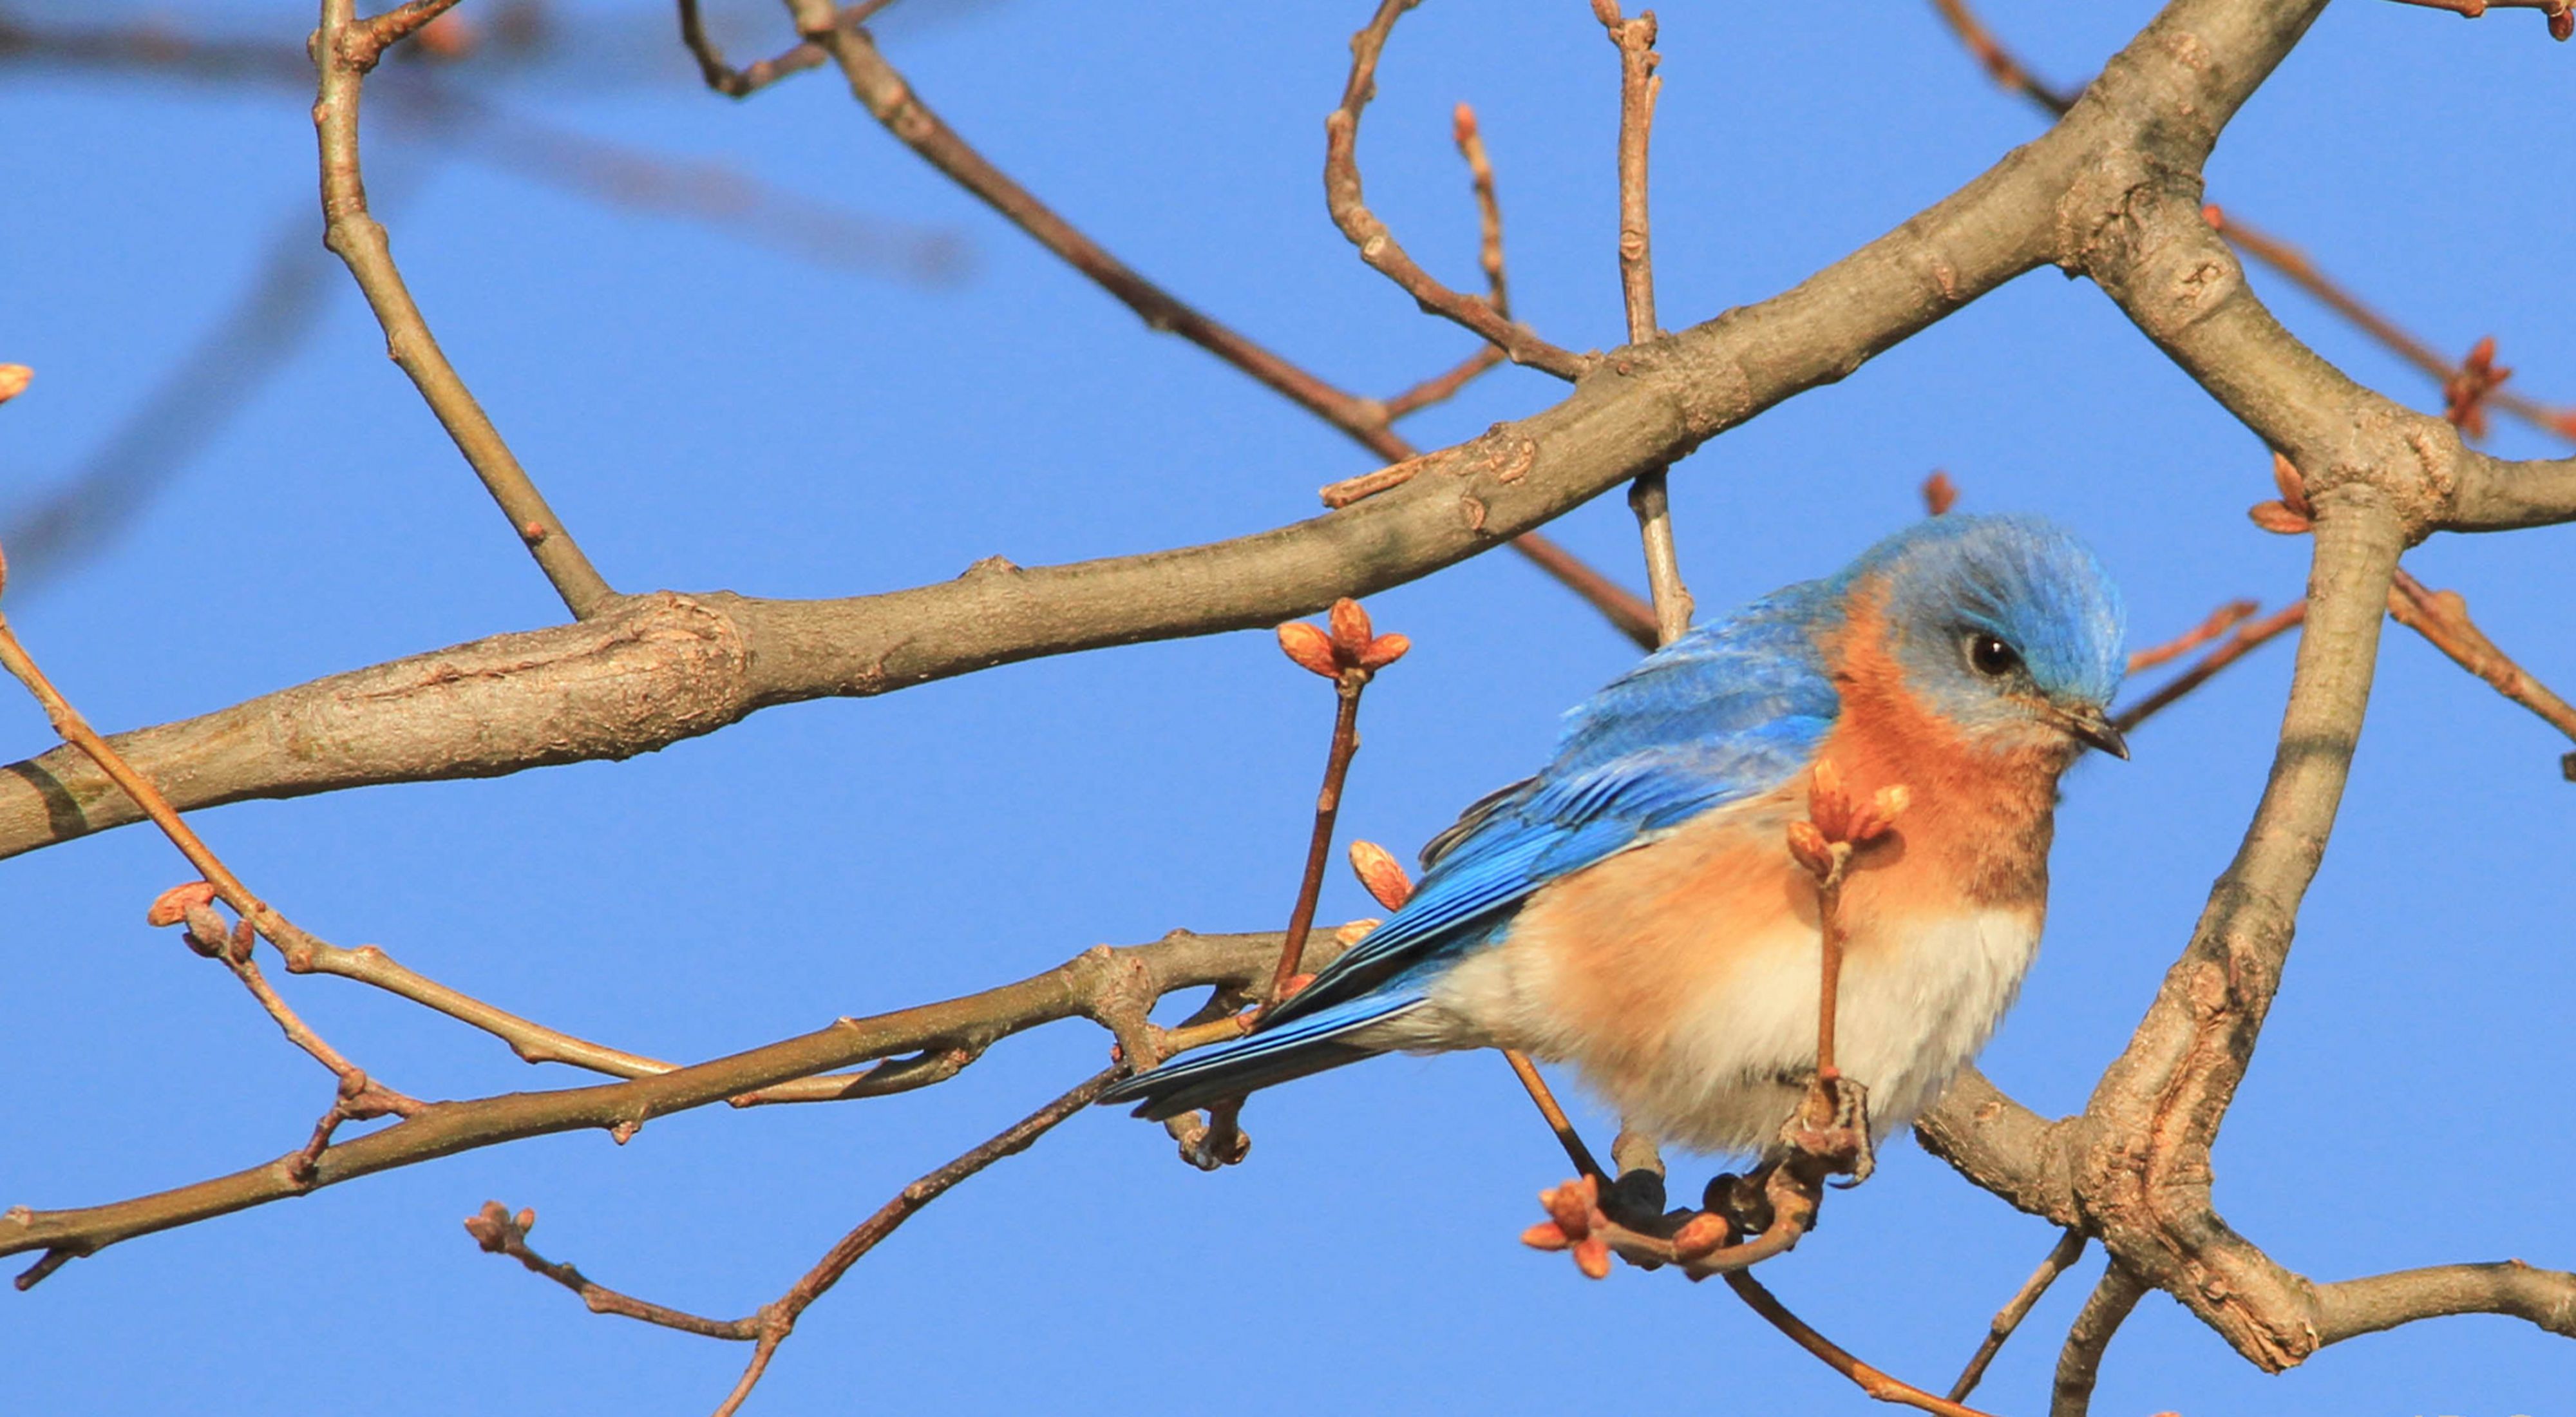 An eastern bluebird rests on a tree.